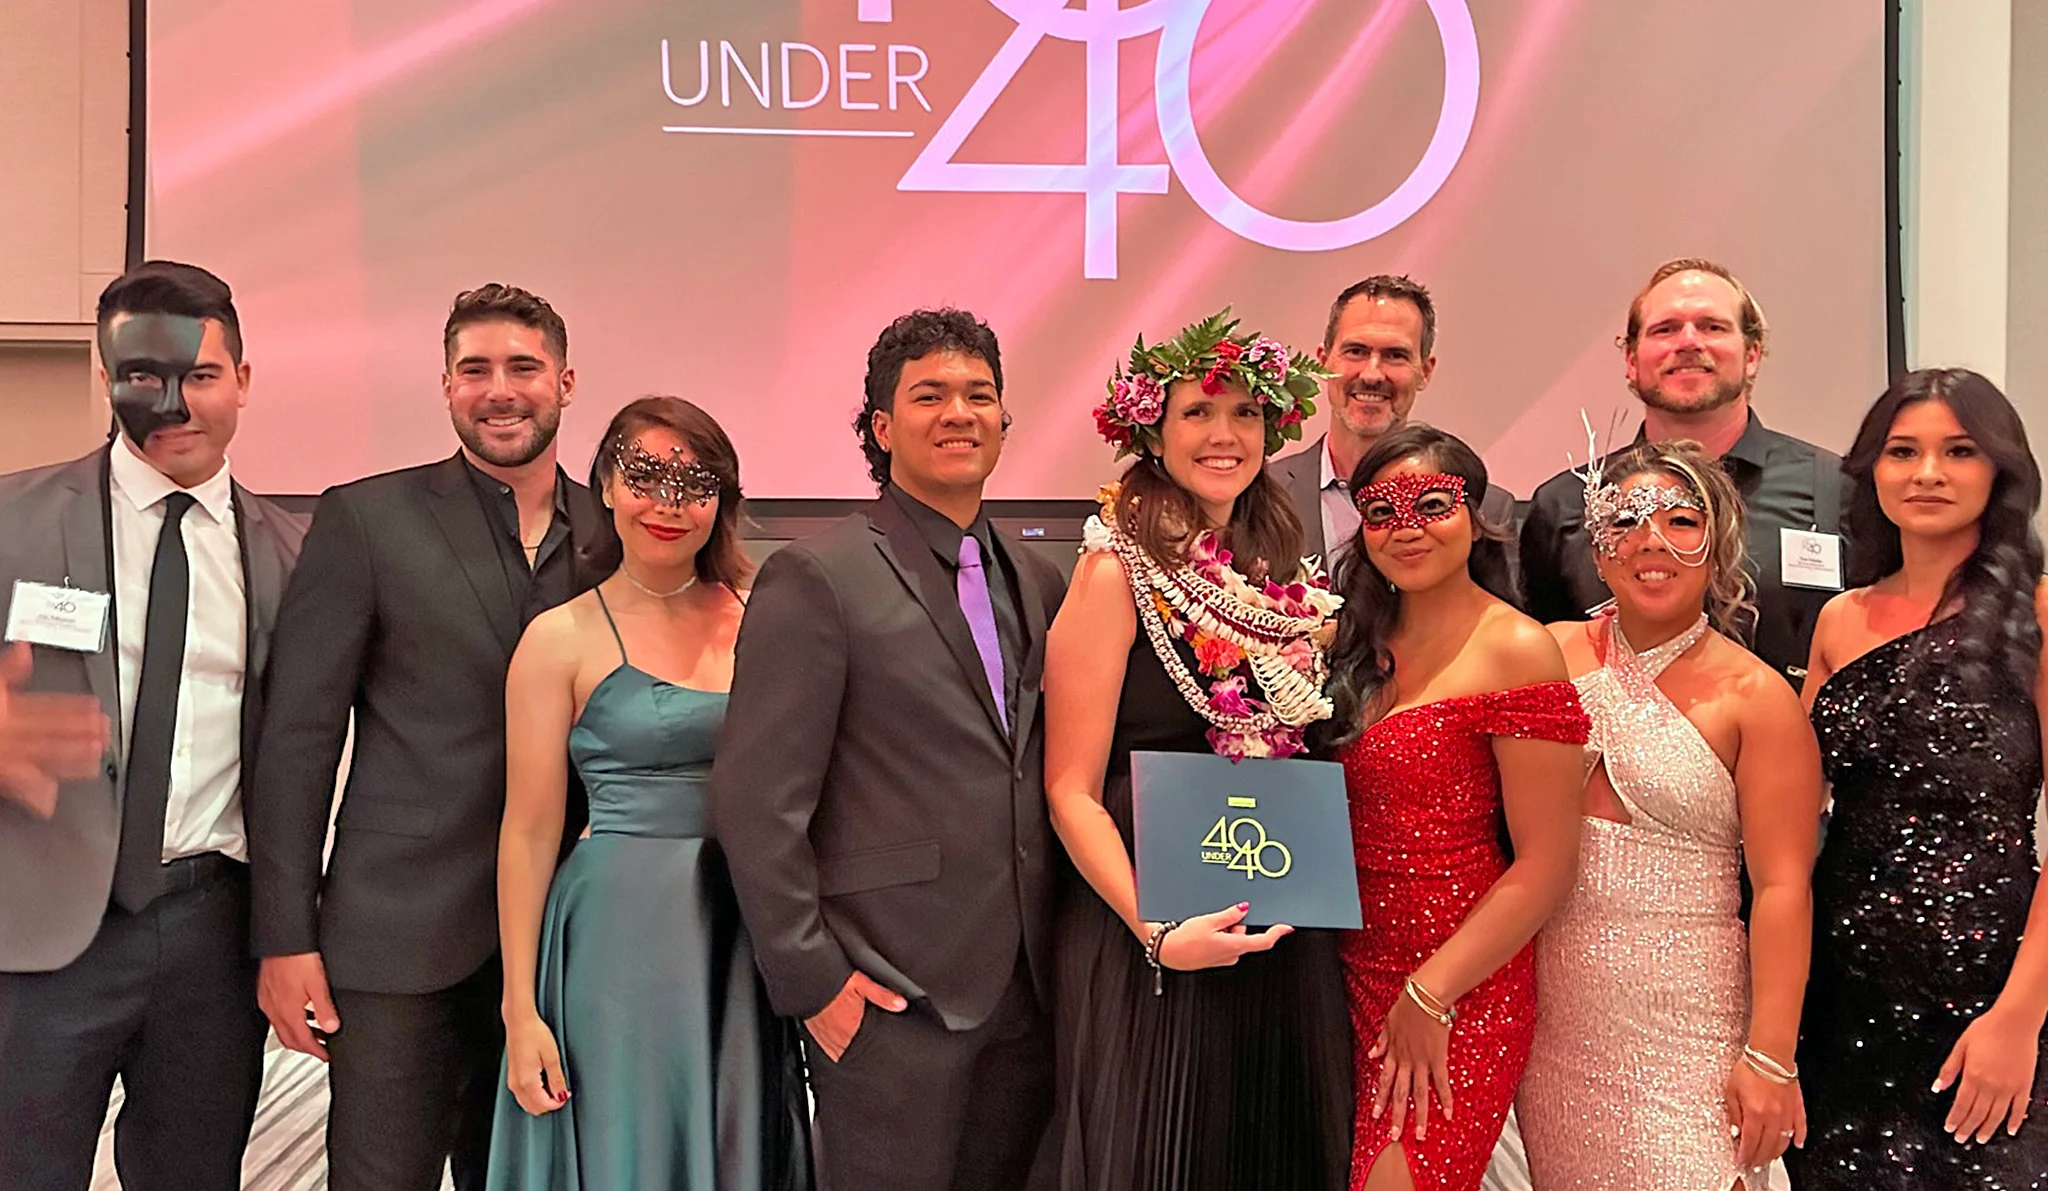 40 under 40 honors Rainbow Helicopters founder Nicole Battjes